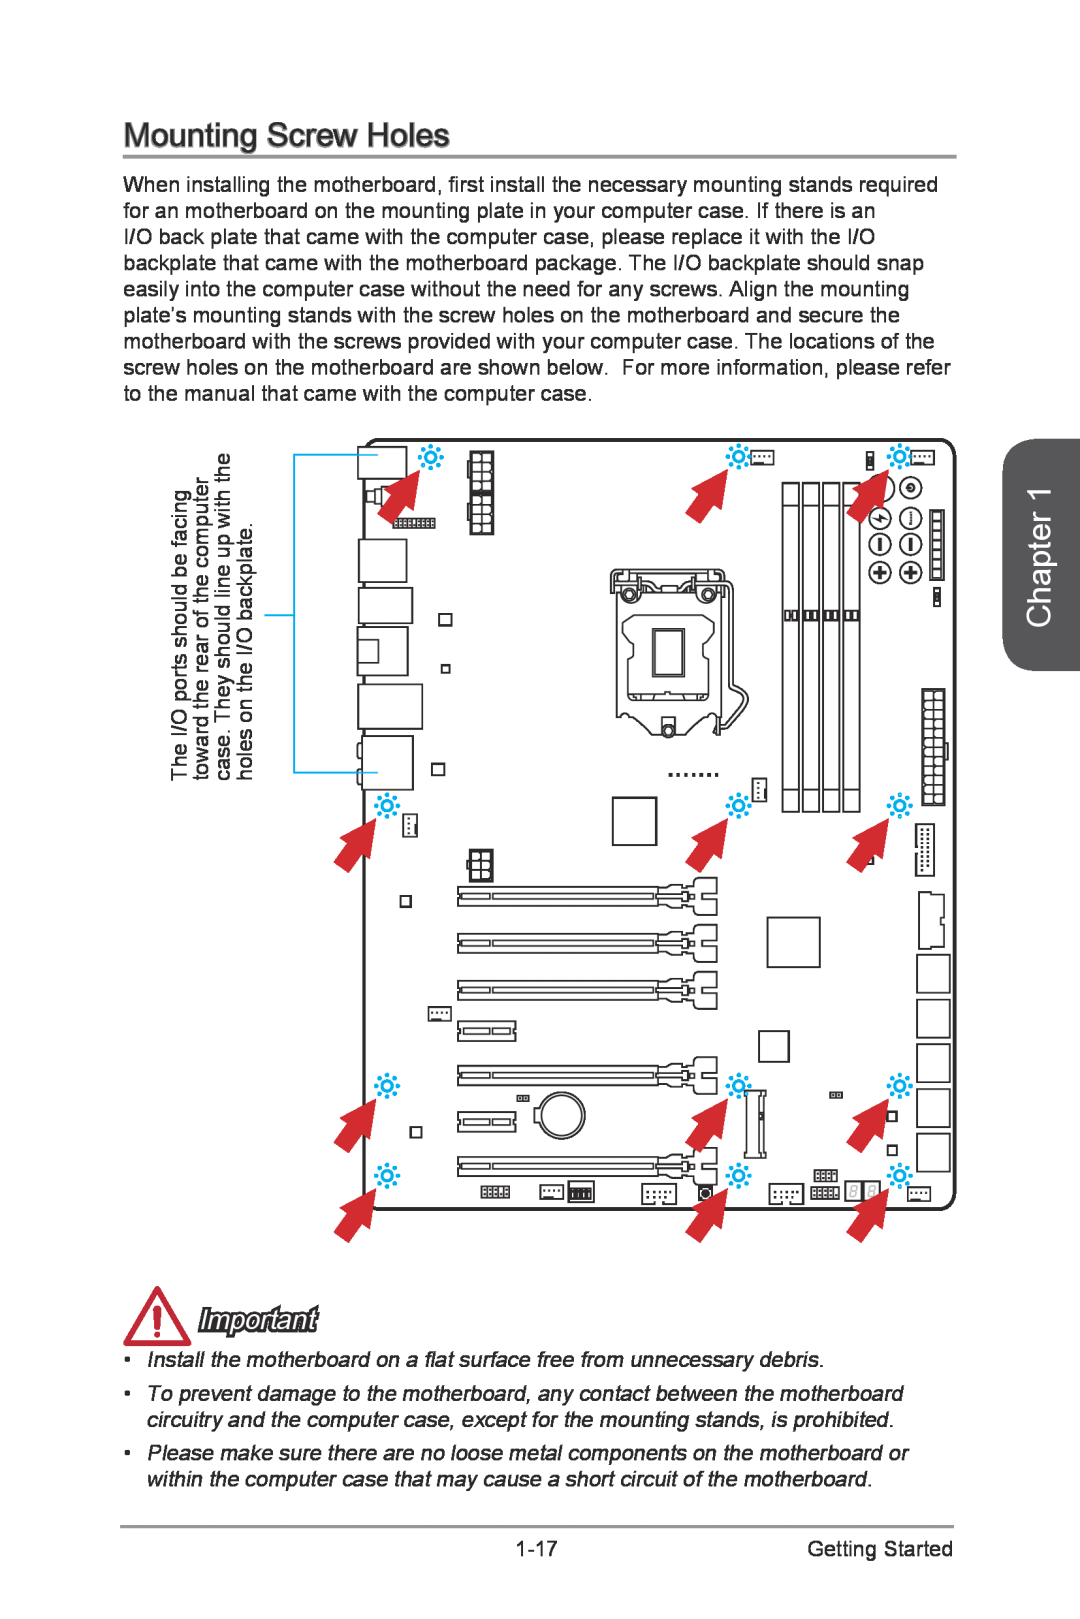 MSI Z87-XPOWER manual Mounting Screw Holes, Chapter, facing 